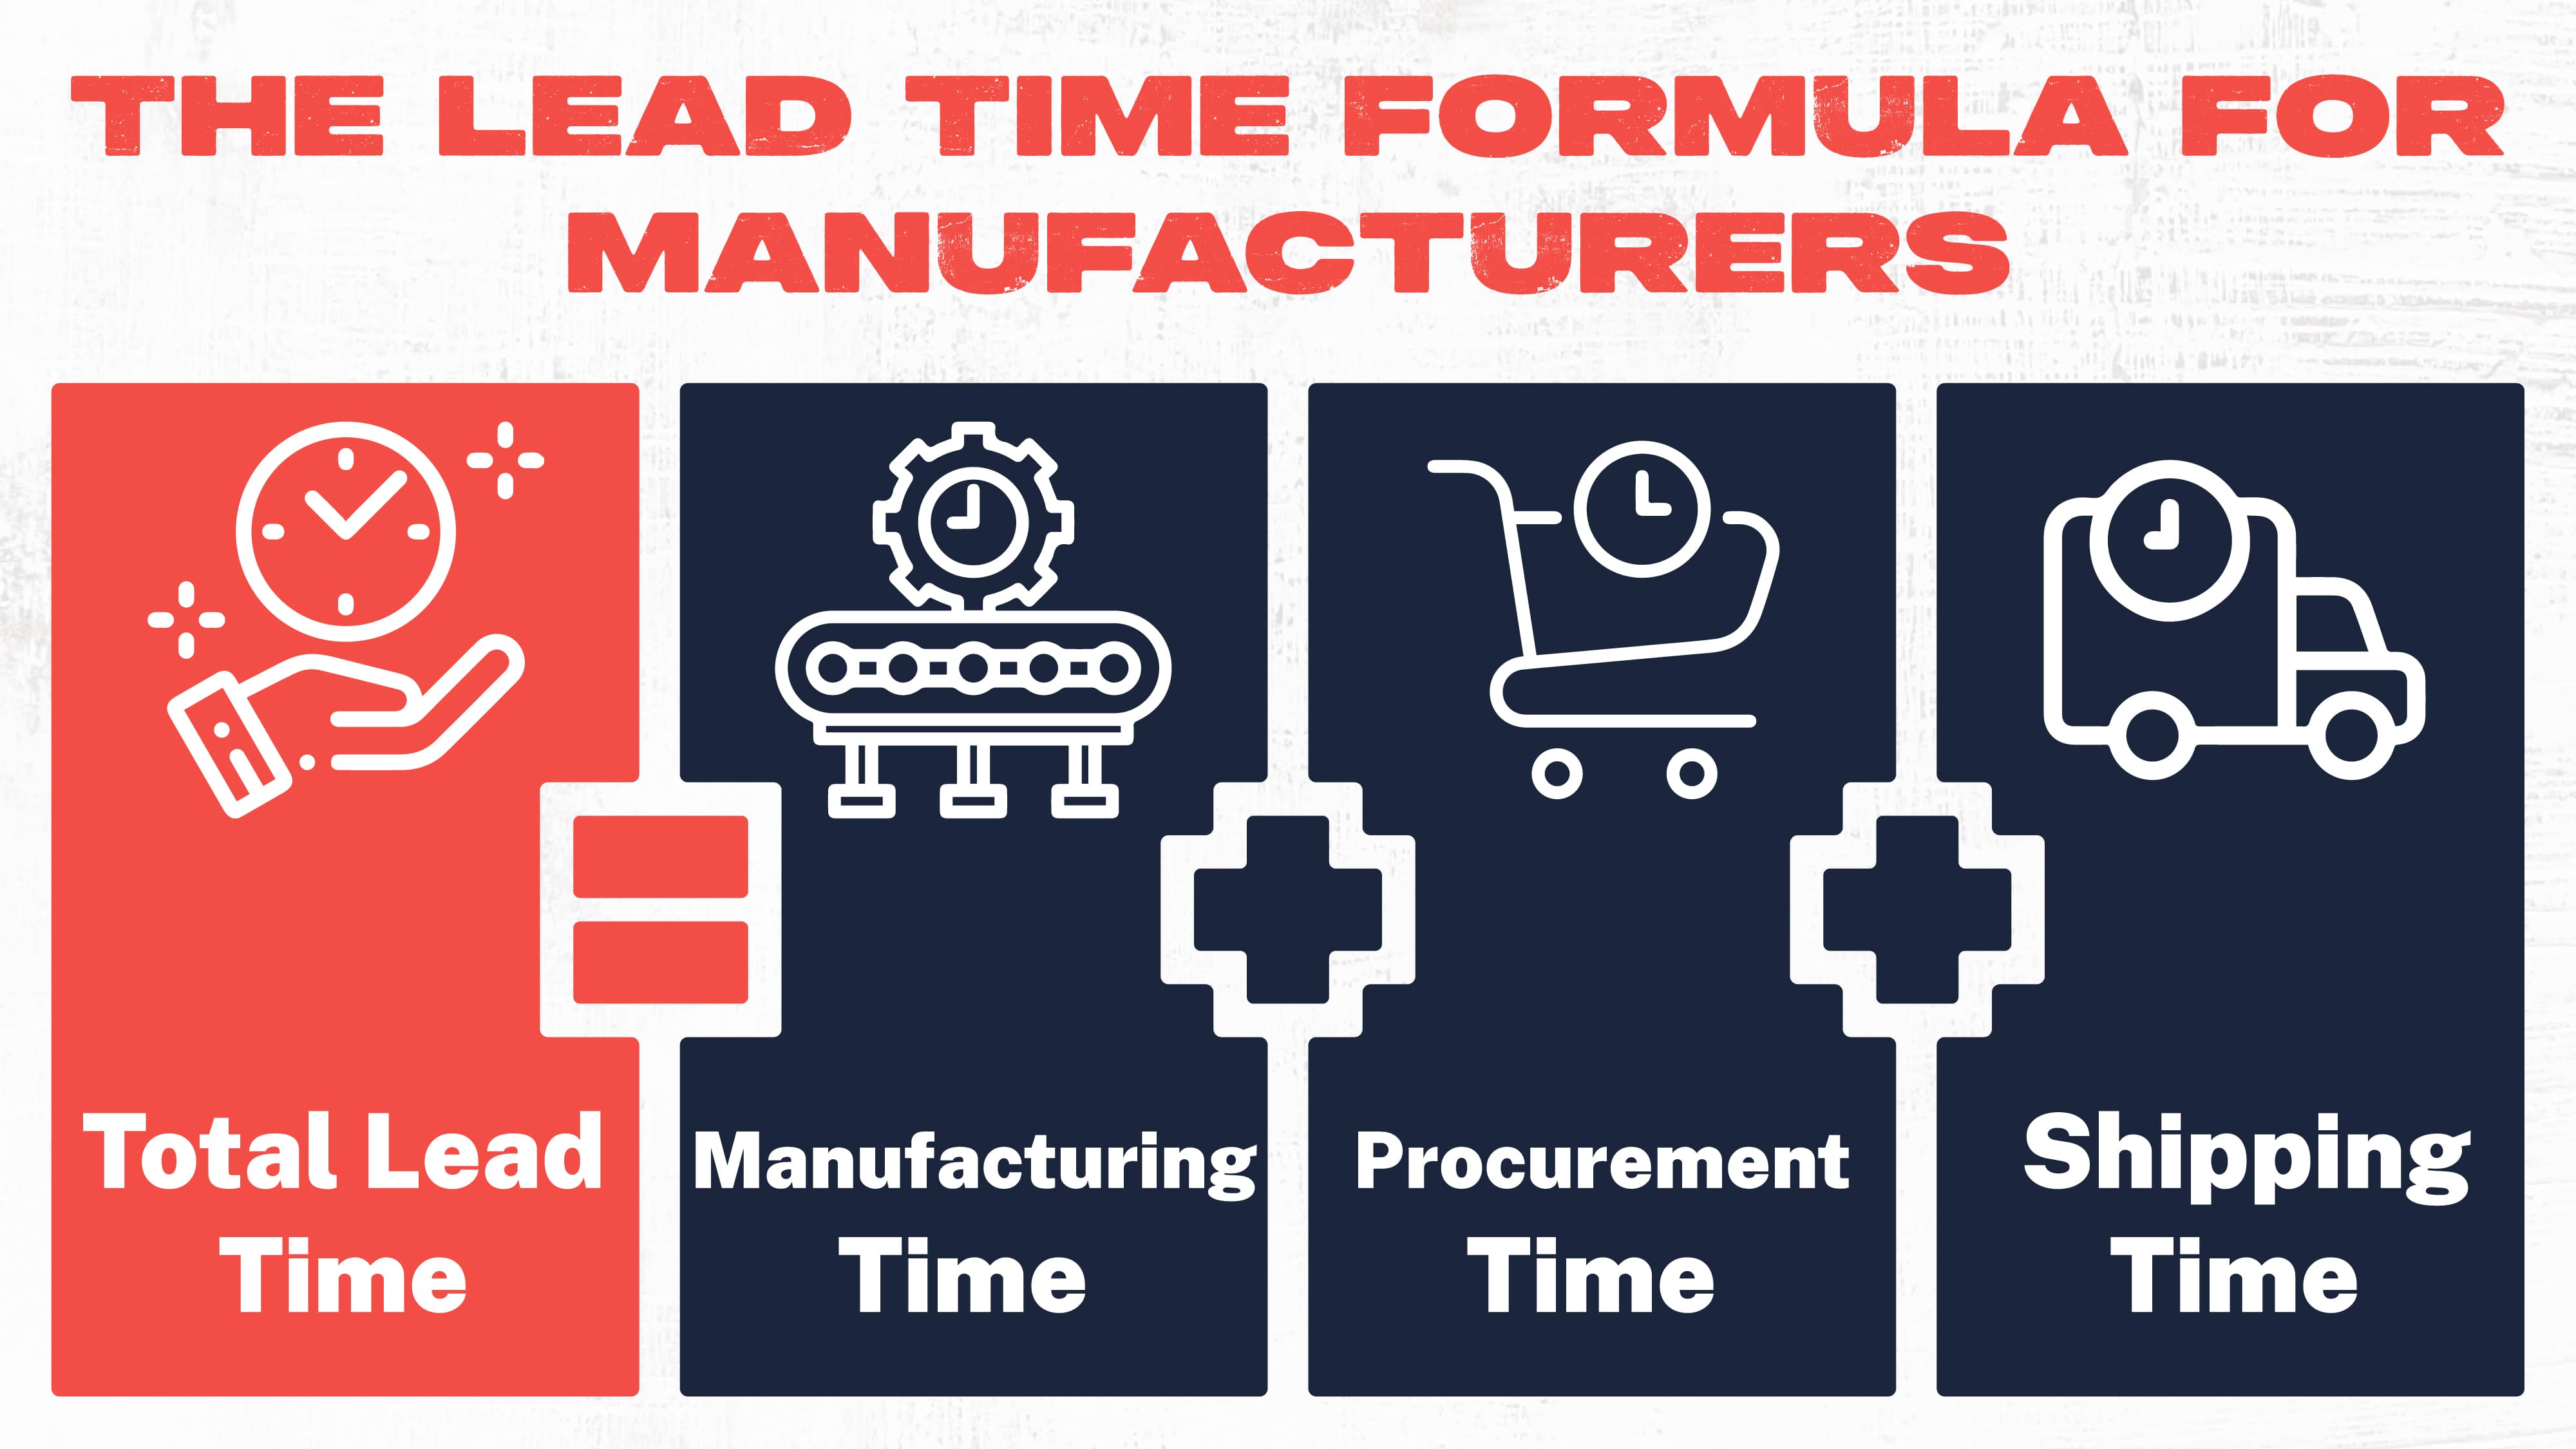 4 The Lead Time Formula for Manufacturers